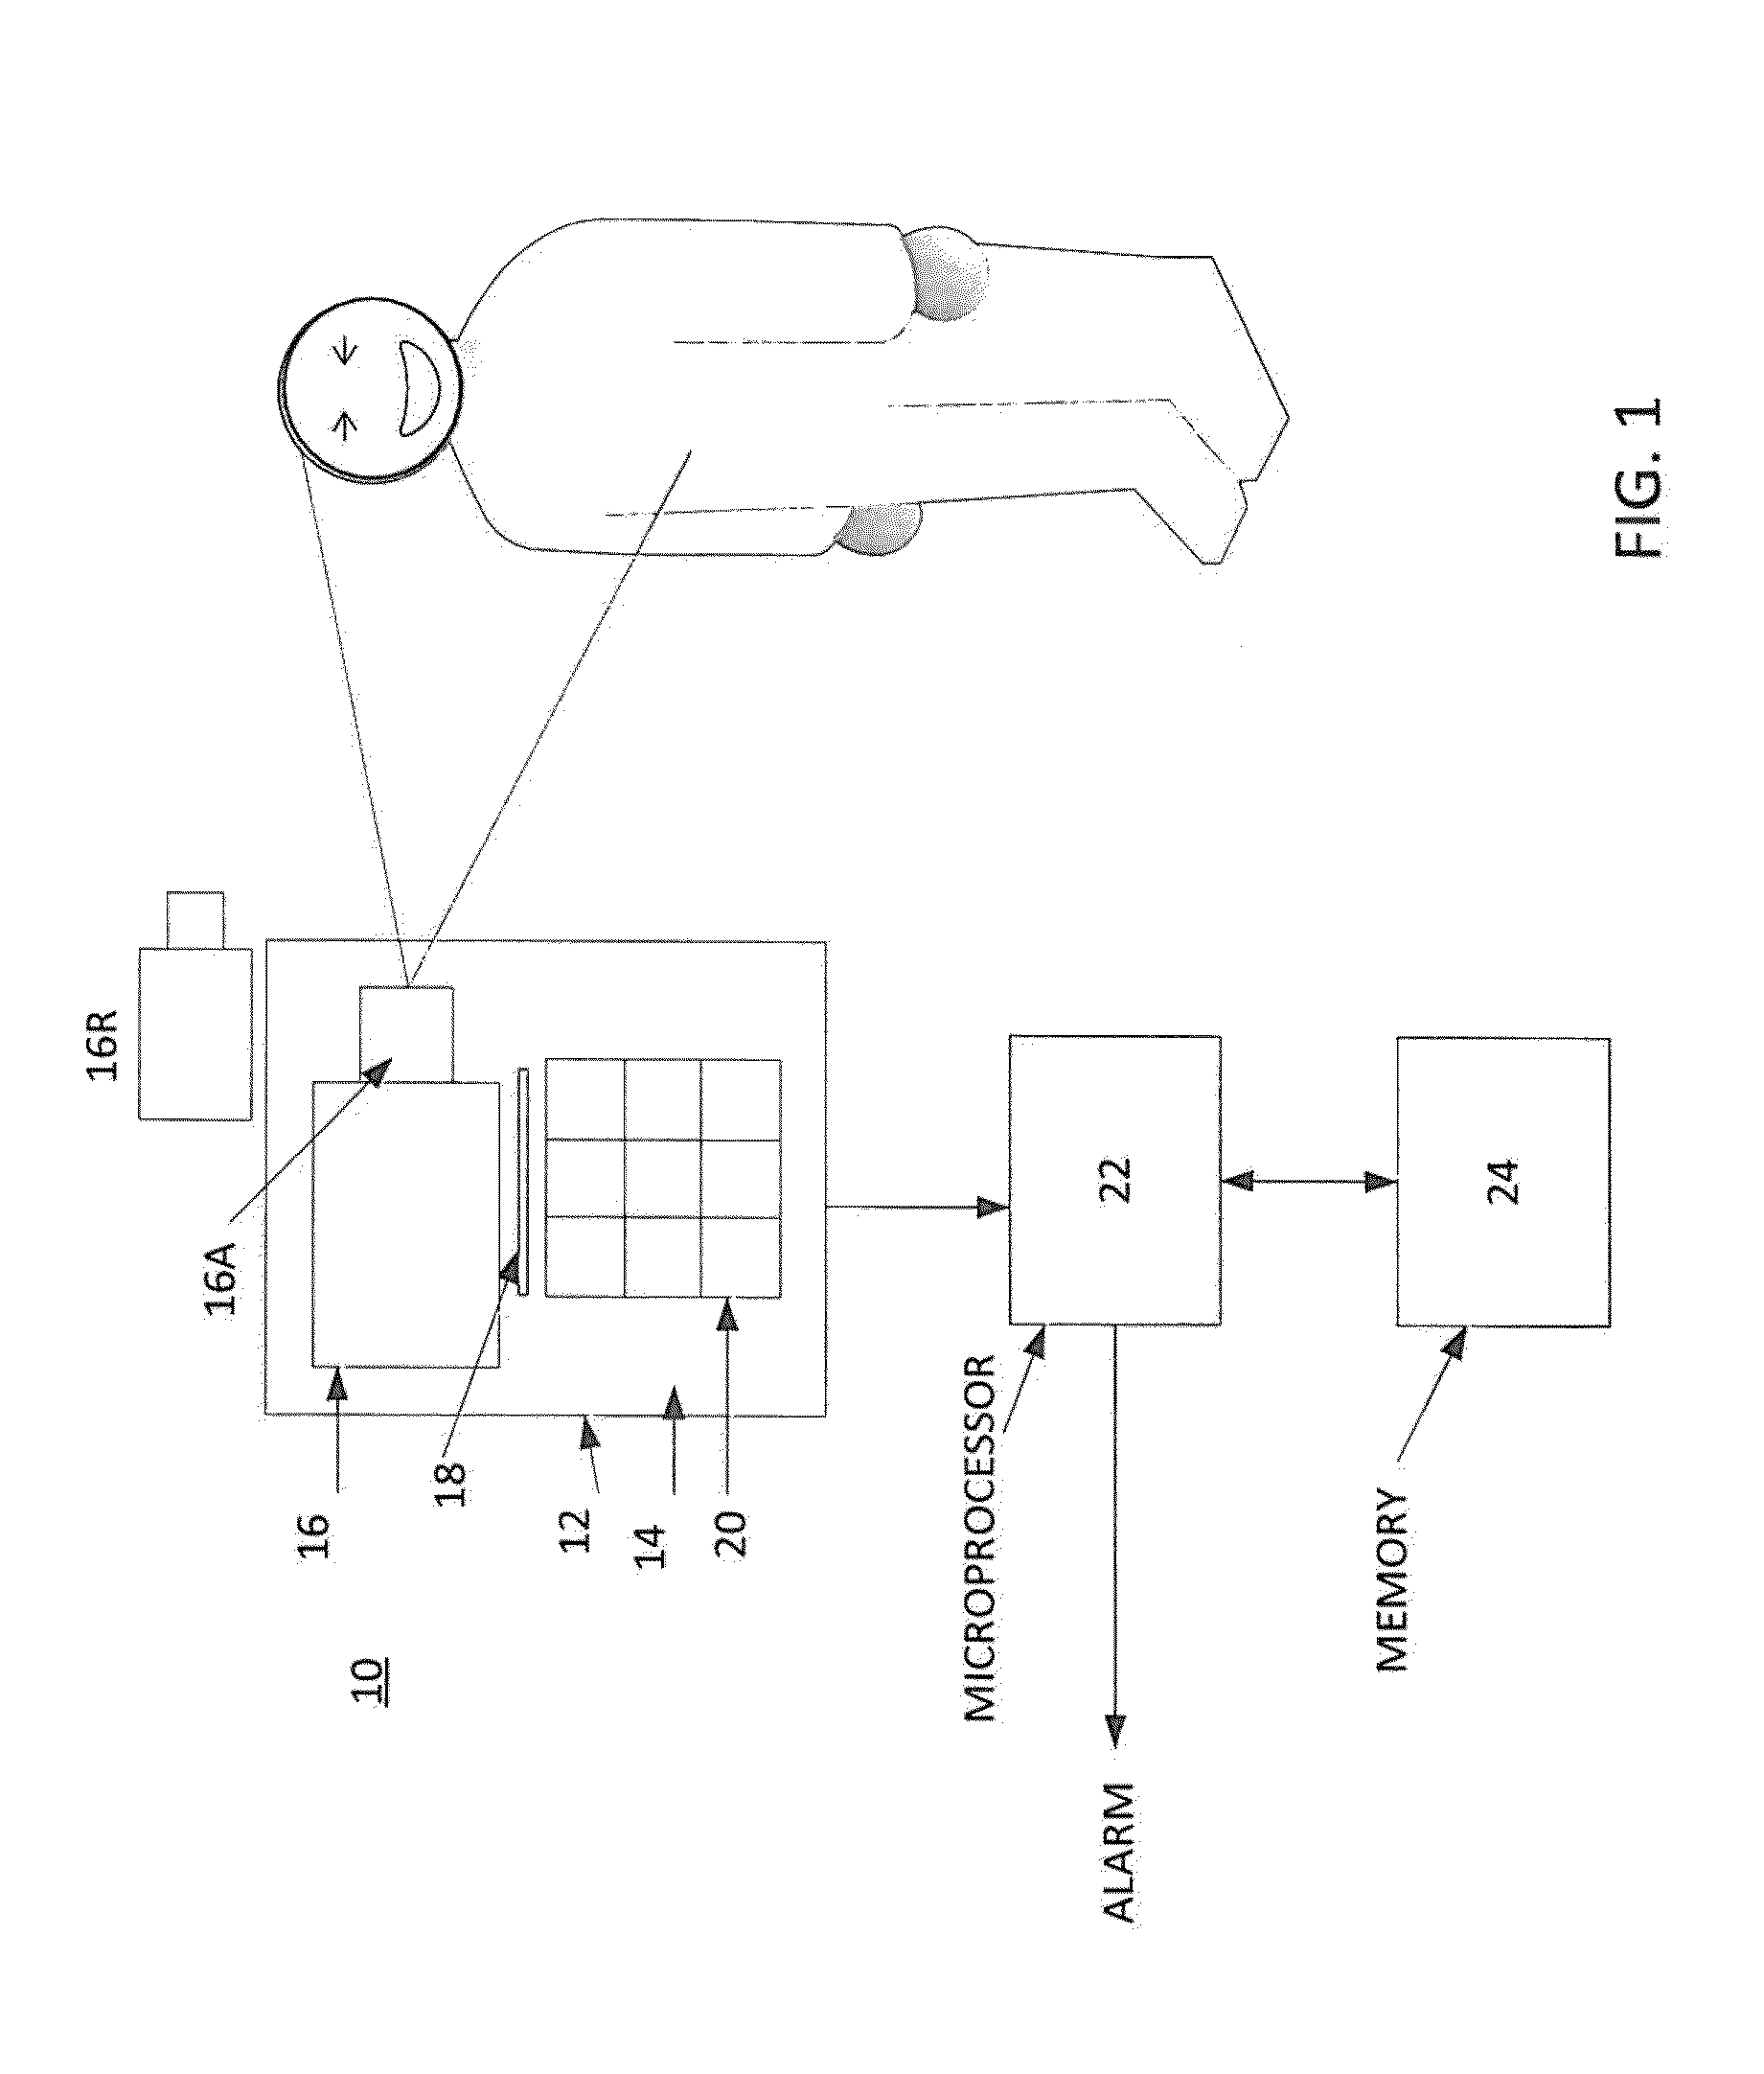 Method and device for authintication of live human faces using infra red images